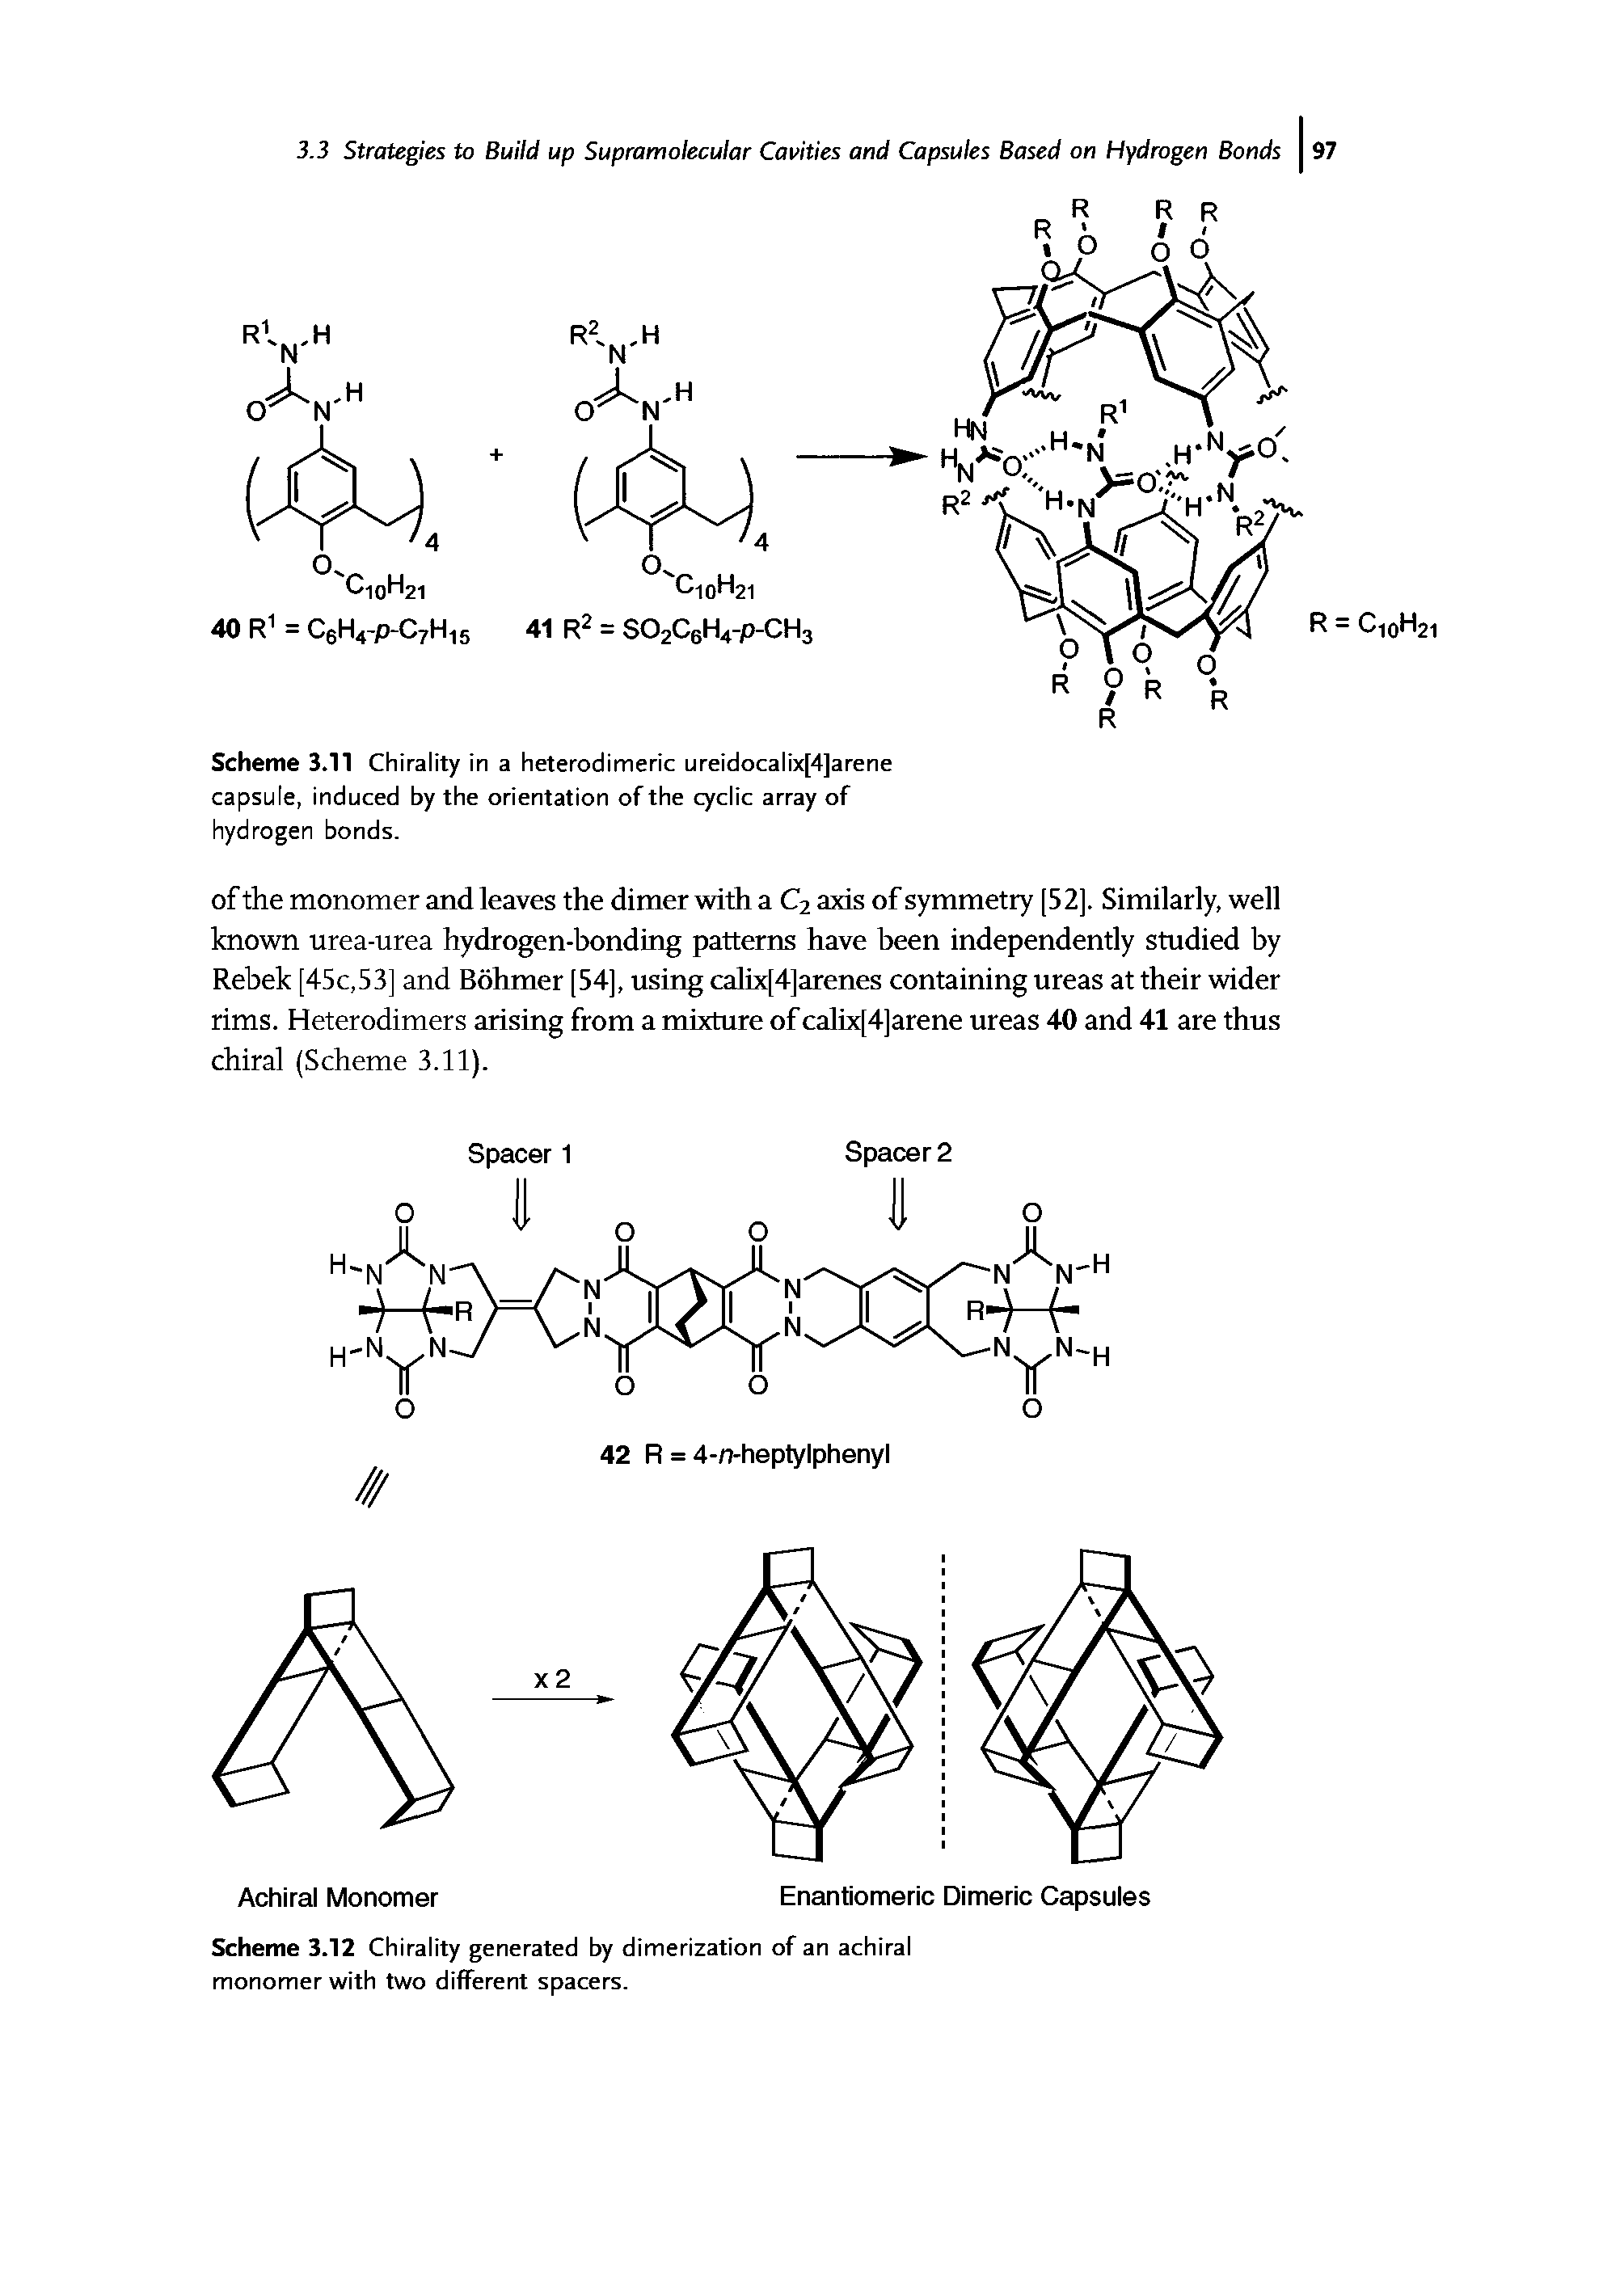 Scheme 3.12 Chirality generated by dimerization of an achiral monomer with two different spacers.